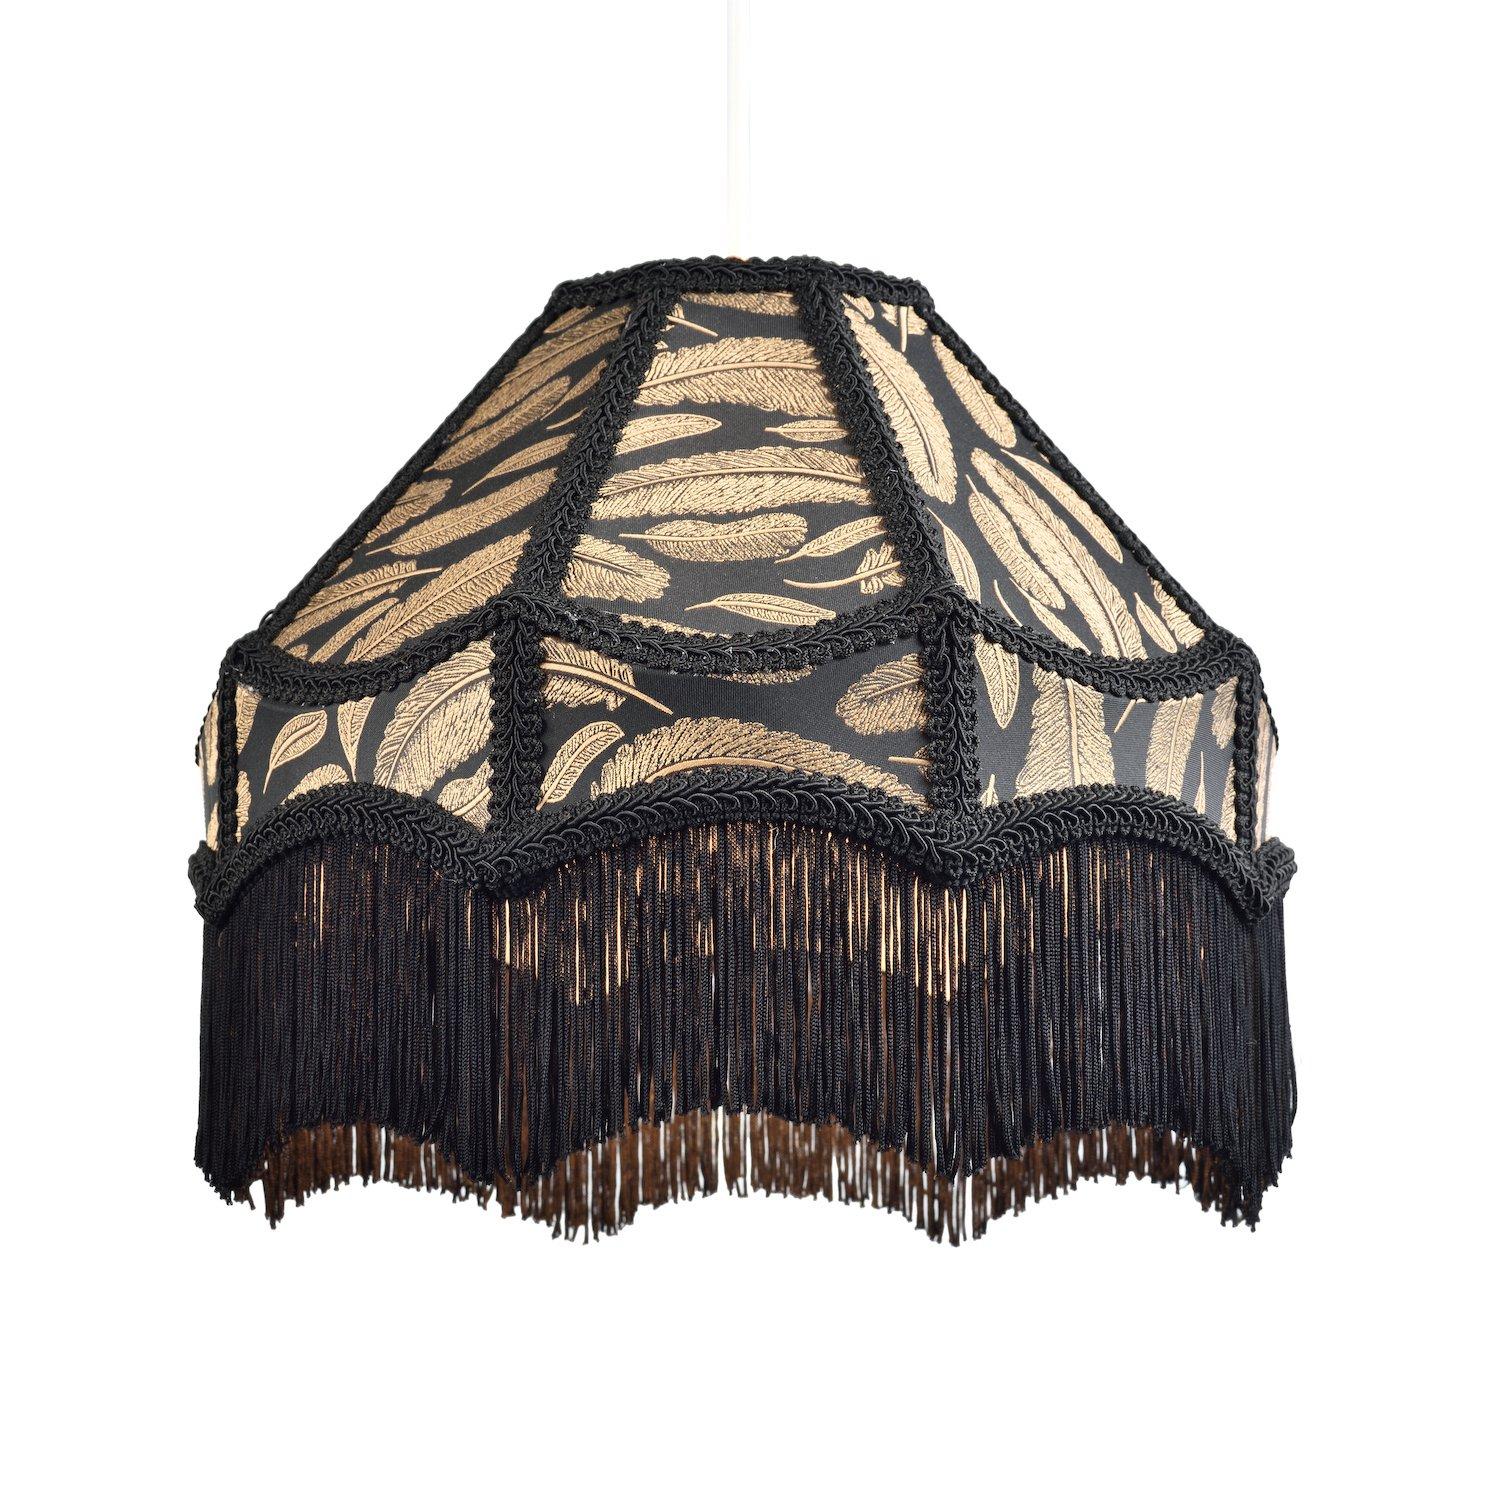 Traditional Black Victorian Empire Pendant Shade with Tassels and Golden Leaves